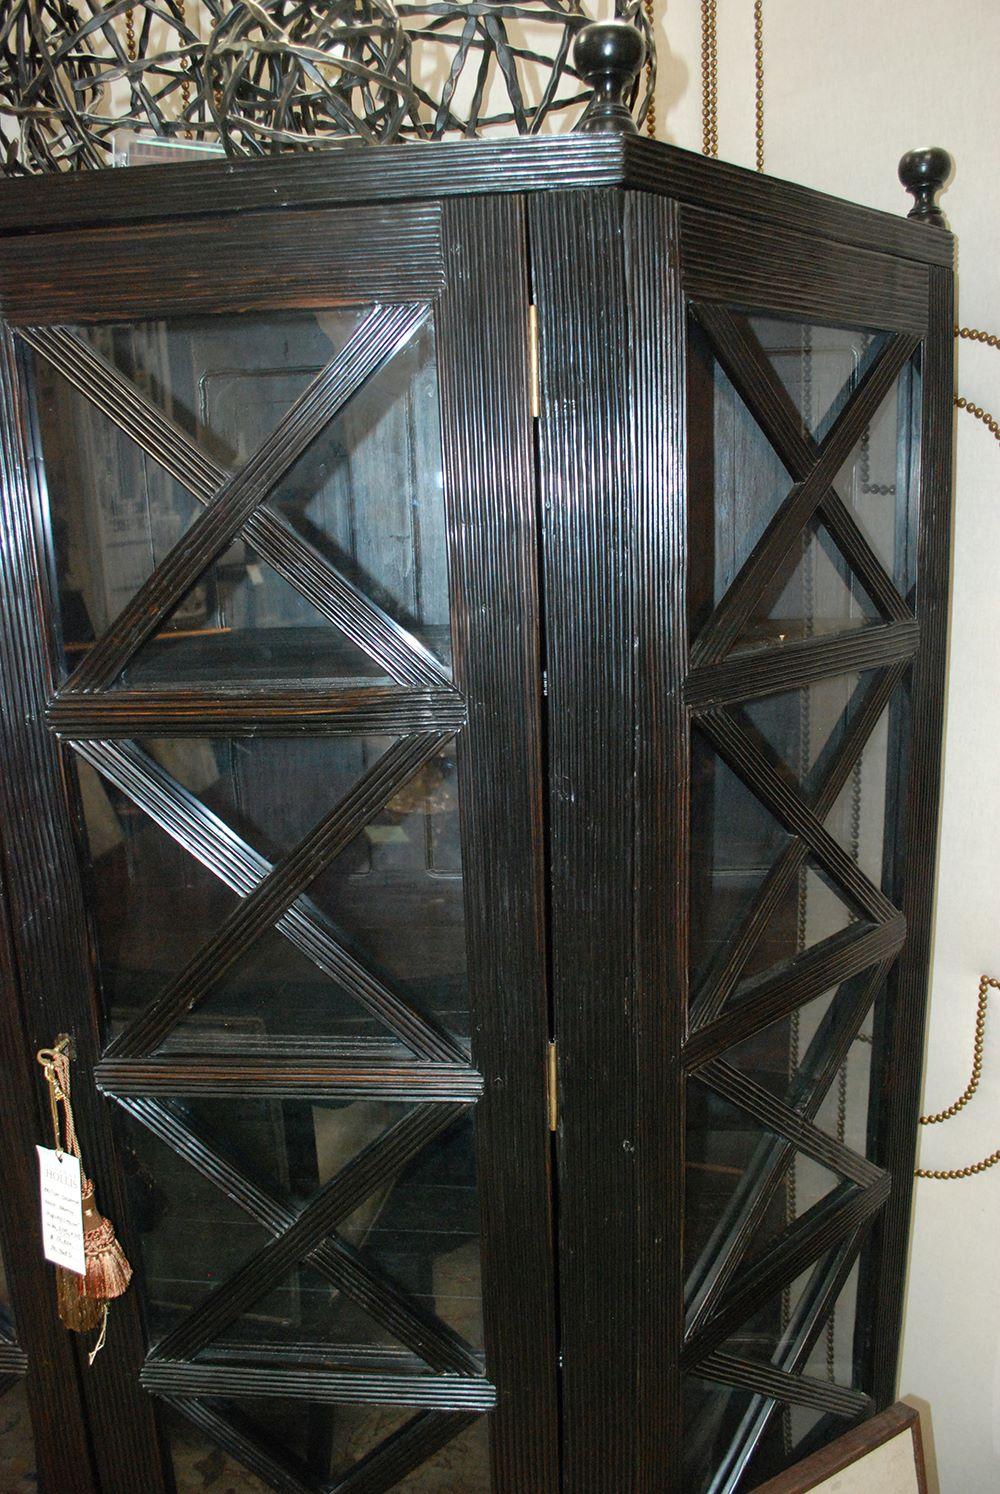 Cabinet, Display X-Design w/2 Glass Doors Repro

A handsome reproduction piece of a British Colonial rosewood X-design display cabinet. The cabinet features intricately carved detailed characteristics with finials at top.